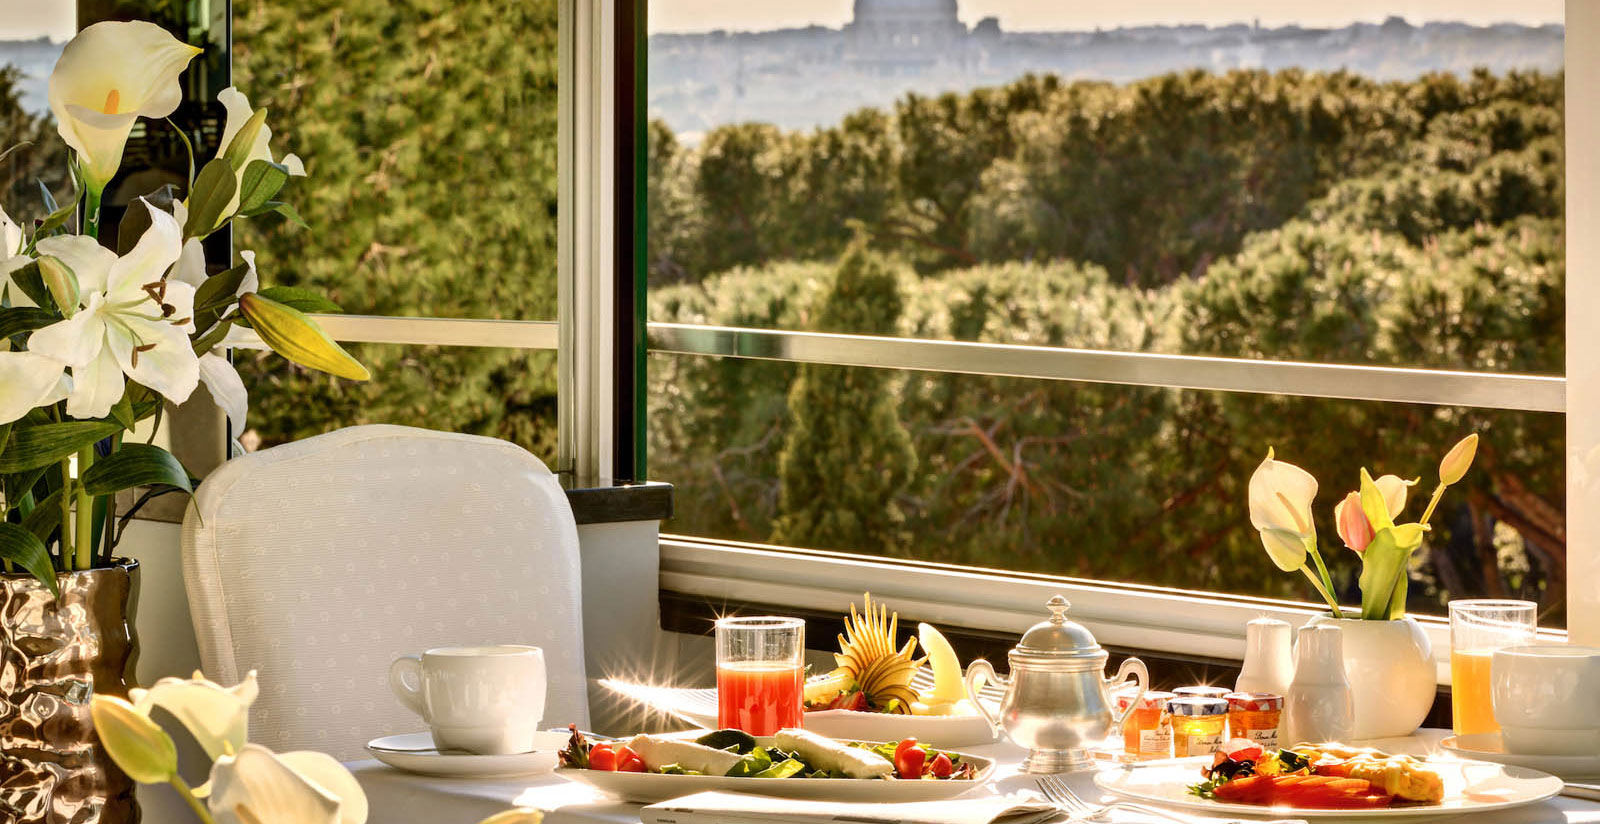 A 5-star breakfast with a view 7